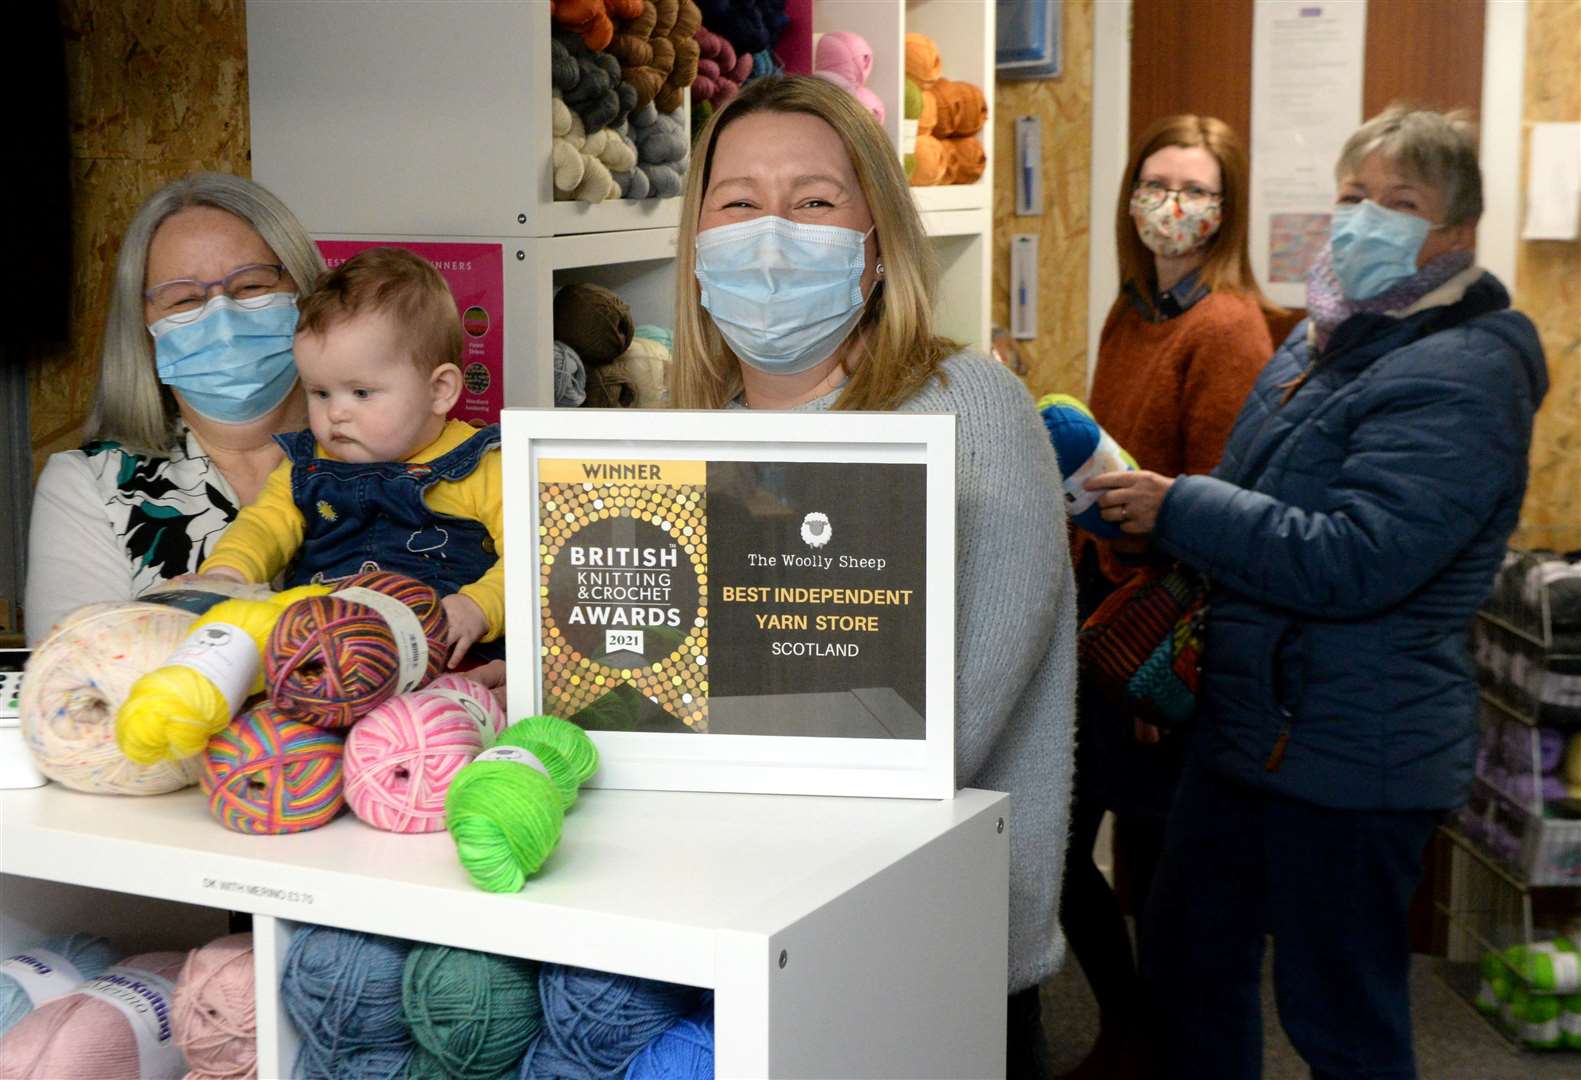 Best independent yarn store in Scotland winner Naomi Whyte (front) of the Woolly Sheep in Inverness with her mum Pearl, seven month year old daughter Ruby Rae Edwards, and customers Mary-Anne Thomson and Andrea Gritter. Picture: James Mackenzie.